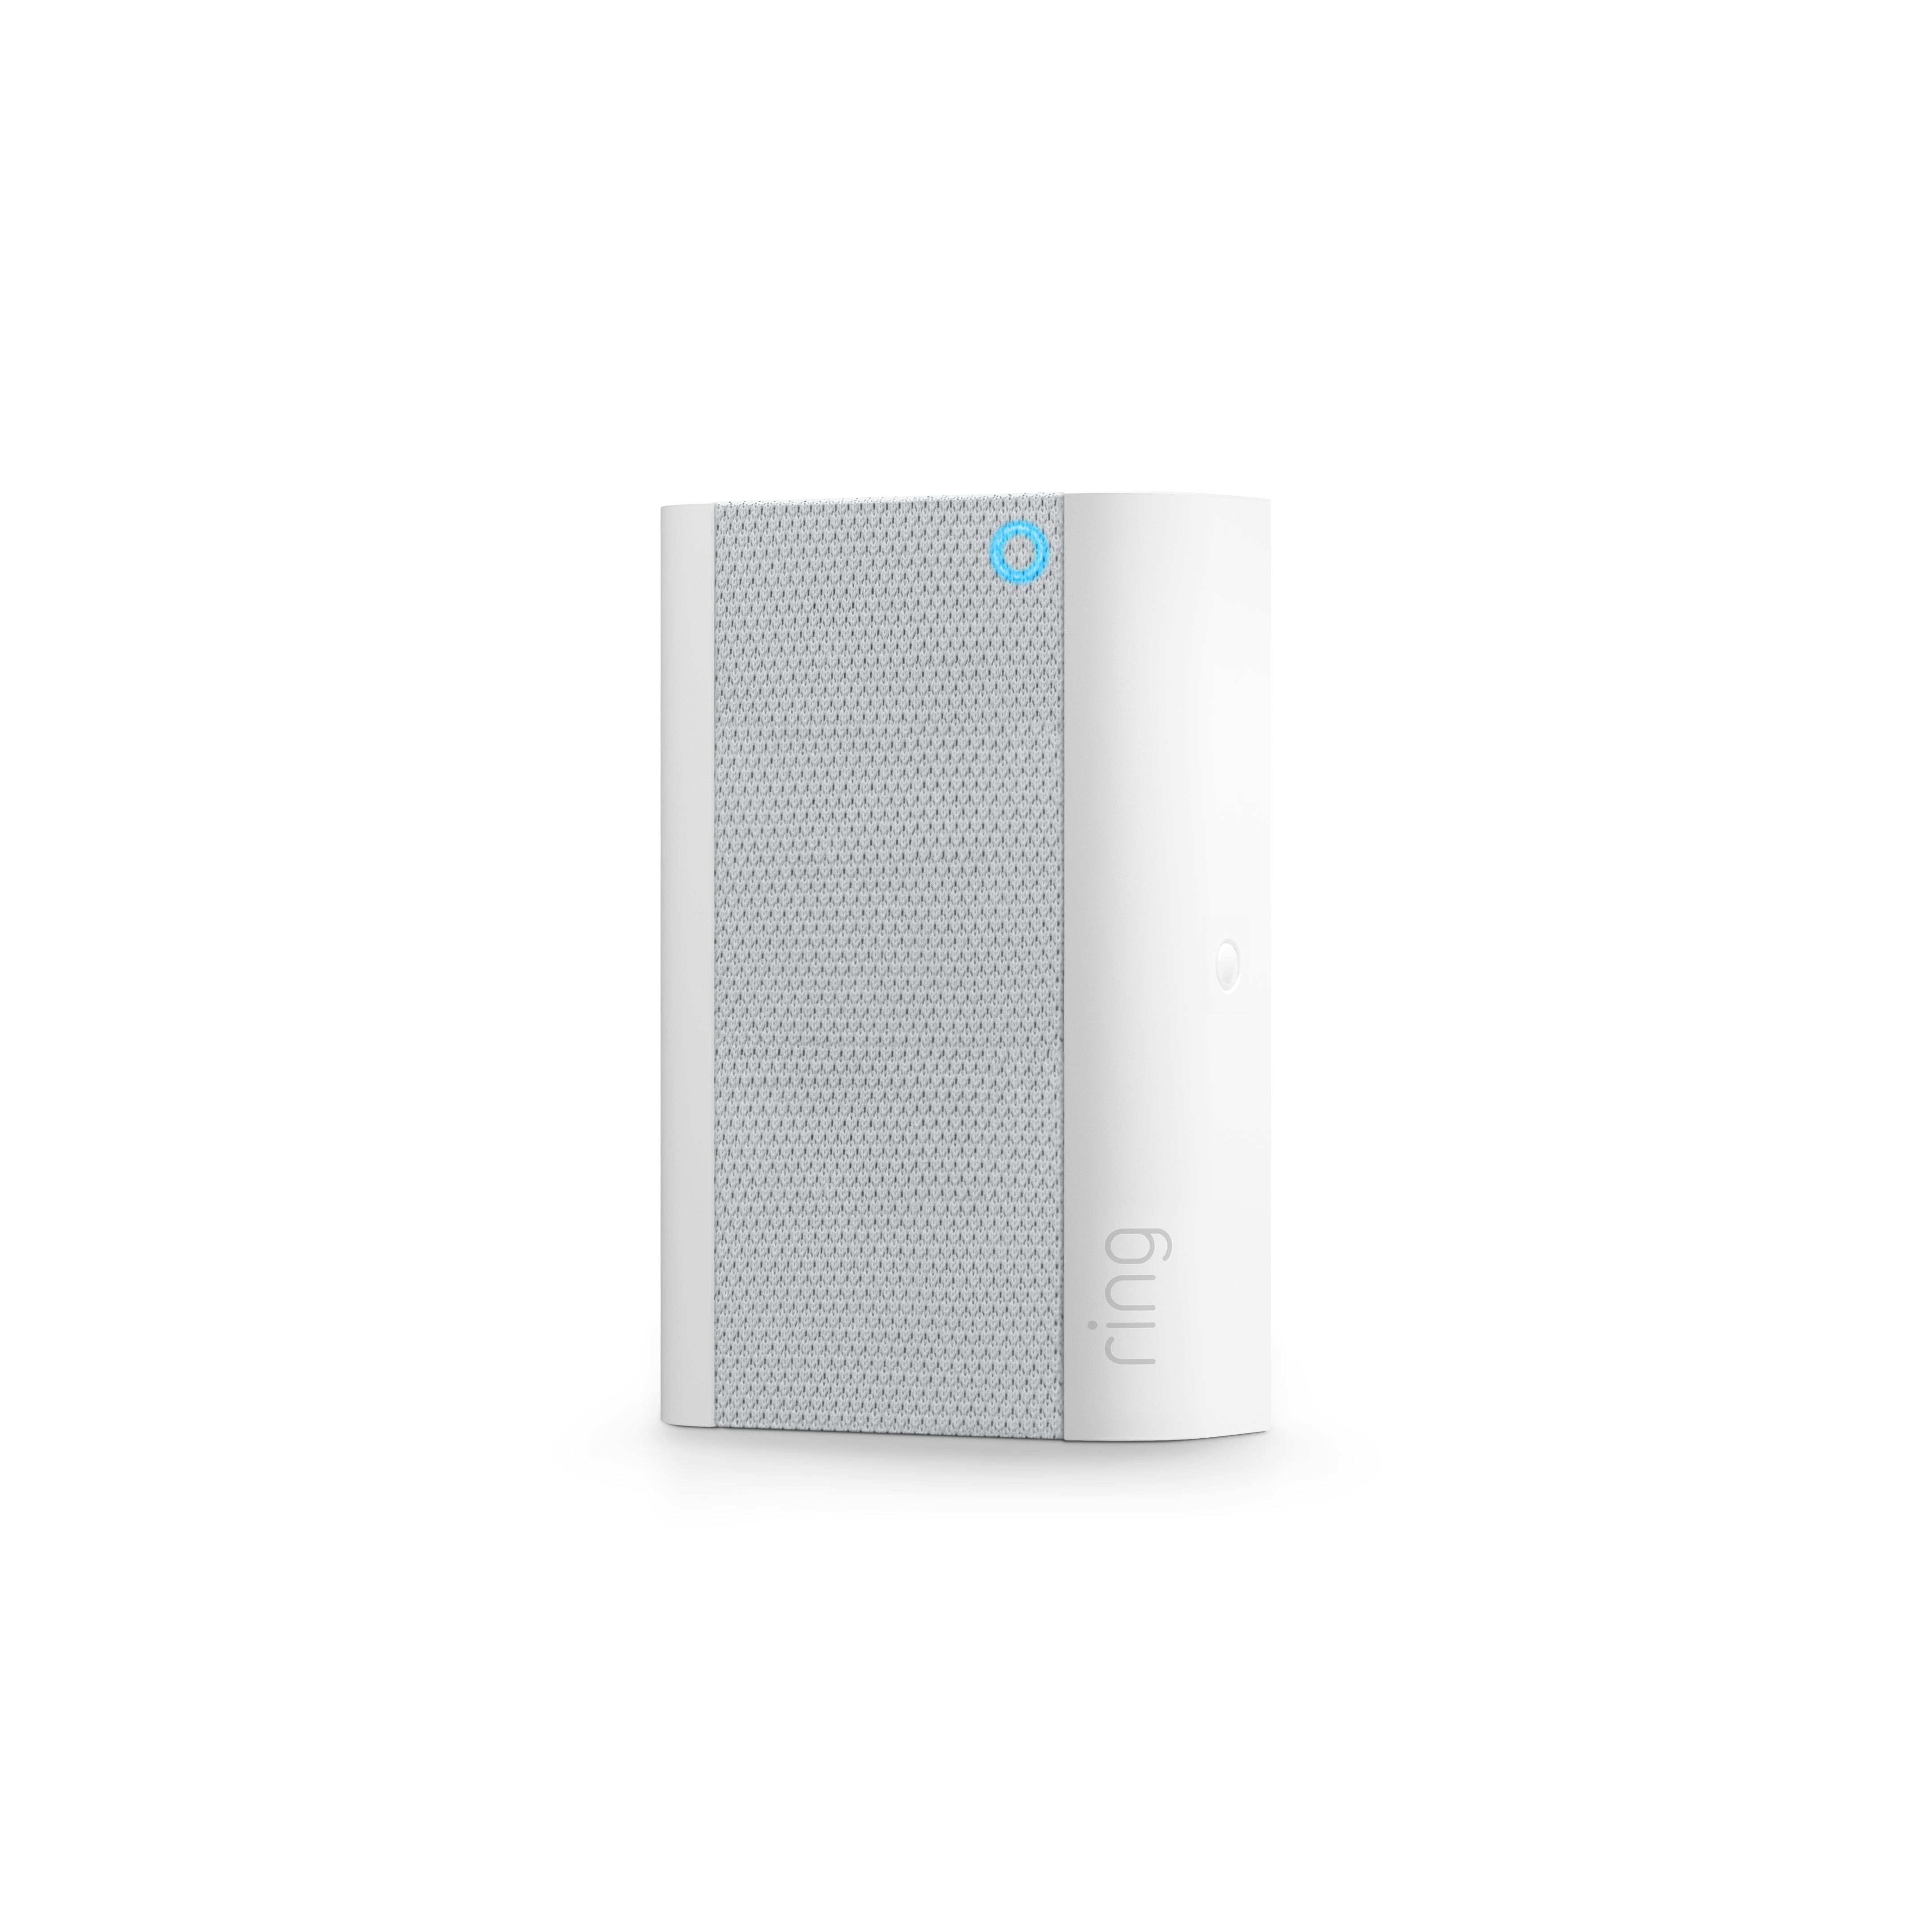 Ring chime pro wifi extender - Networking & Servers